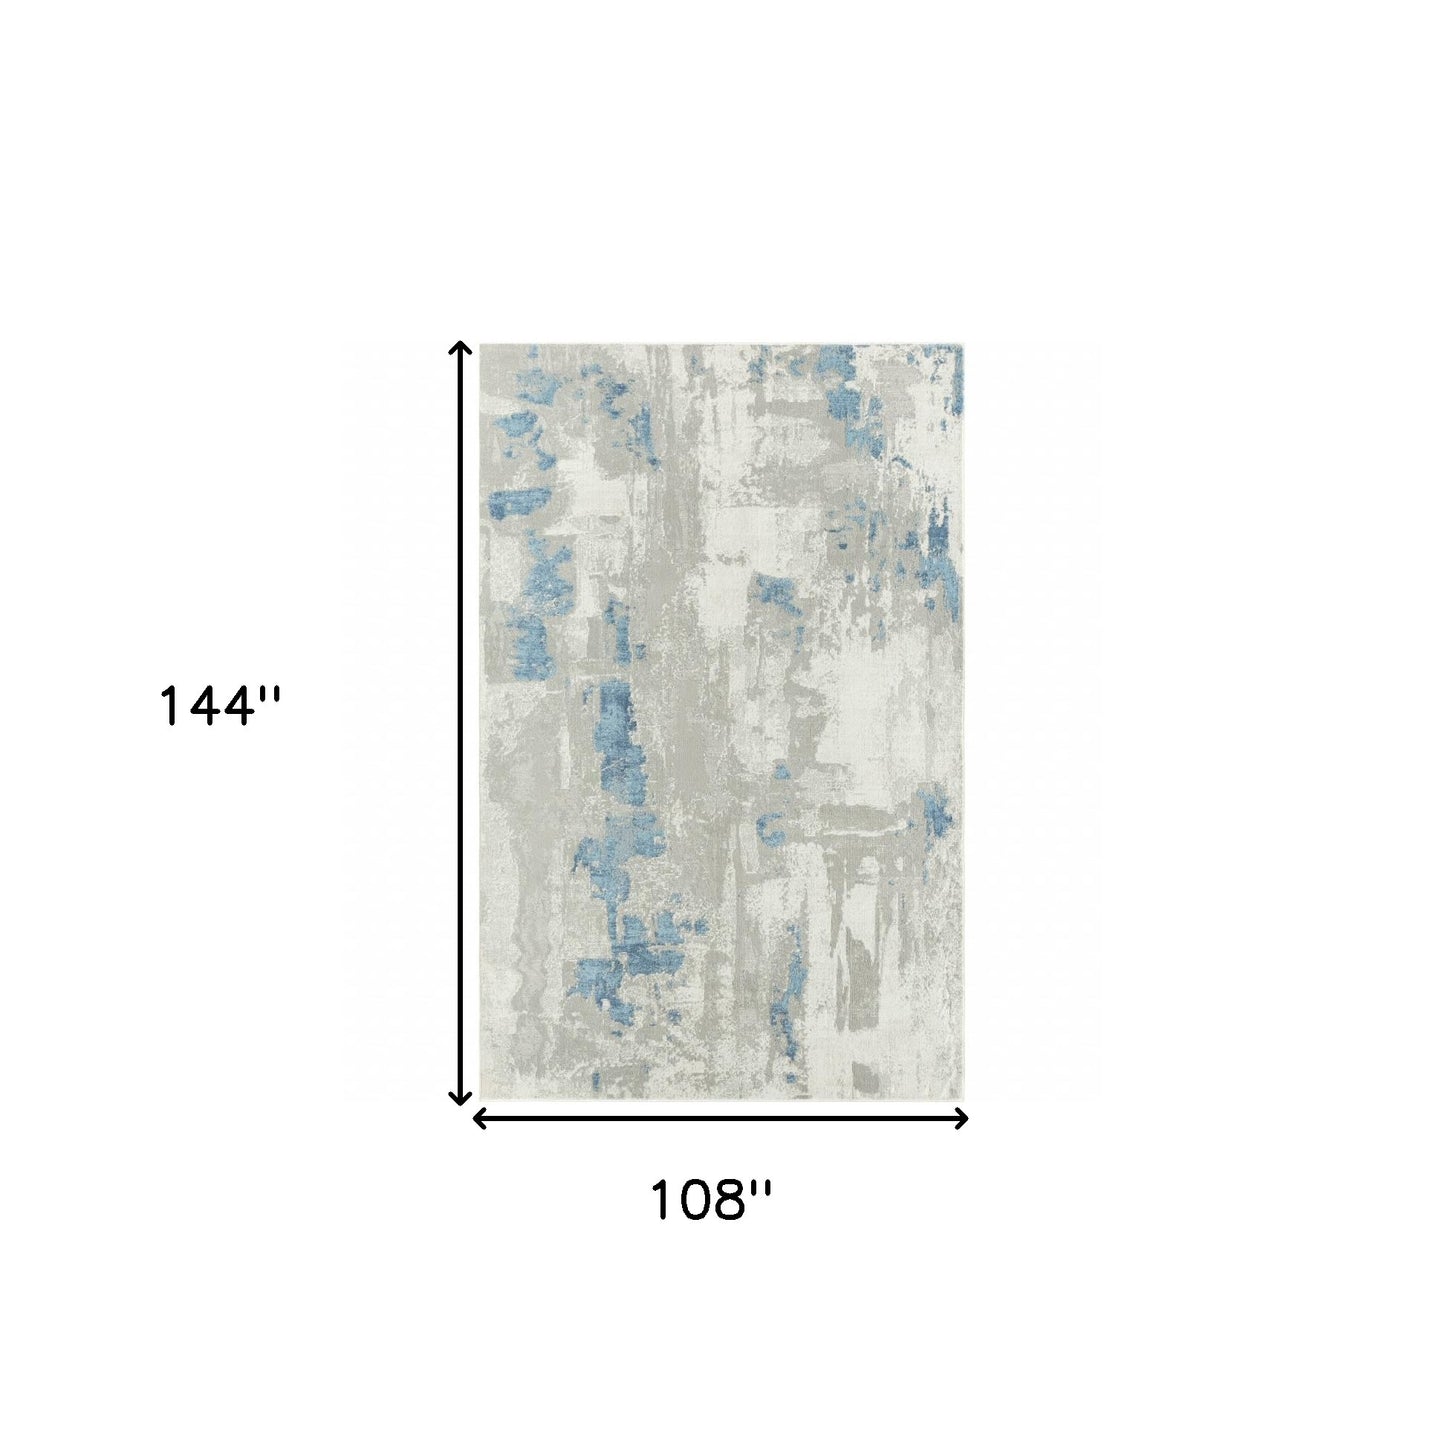 9' X 12' Ivory Gray And Blue Abstract Power Loom Stain Resistant Area Rug